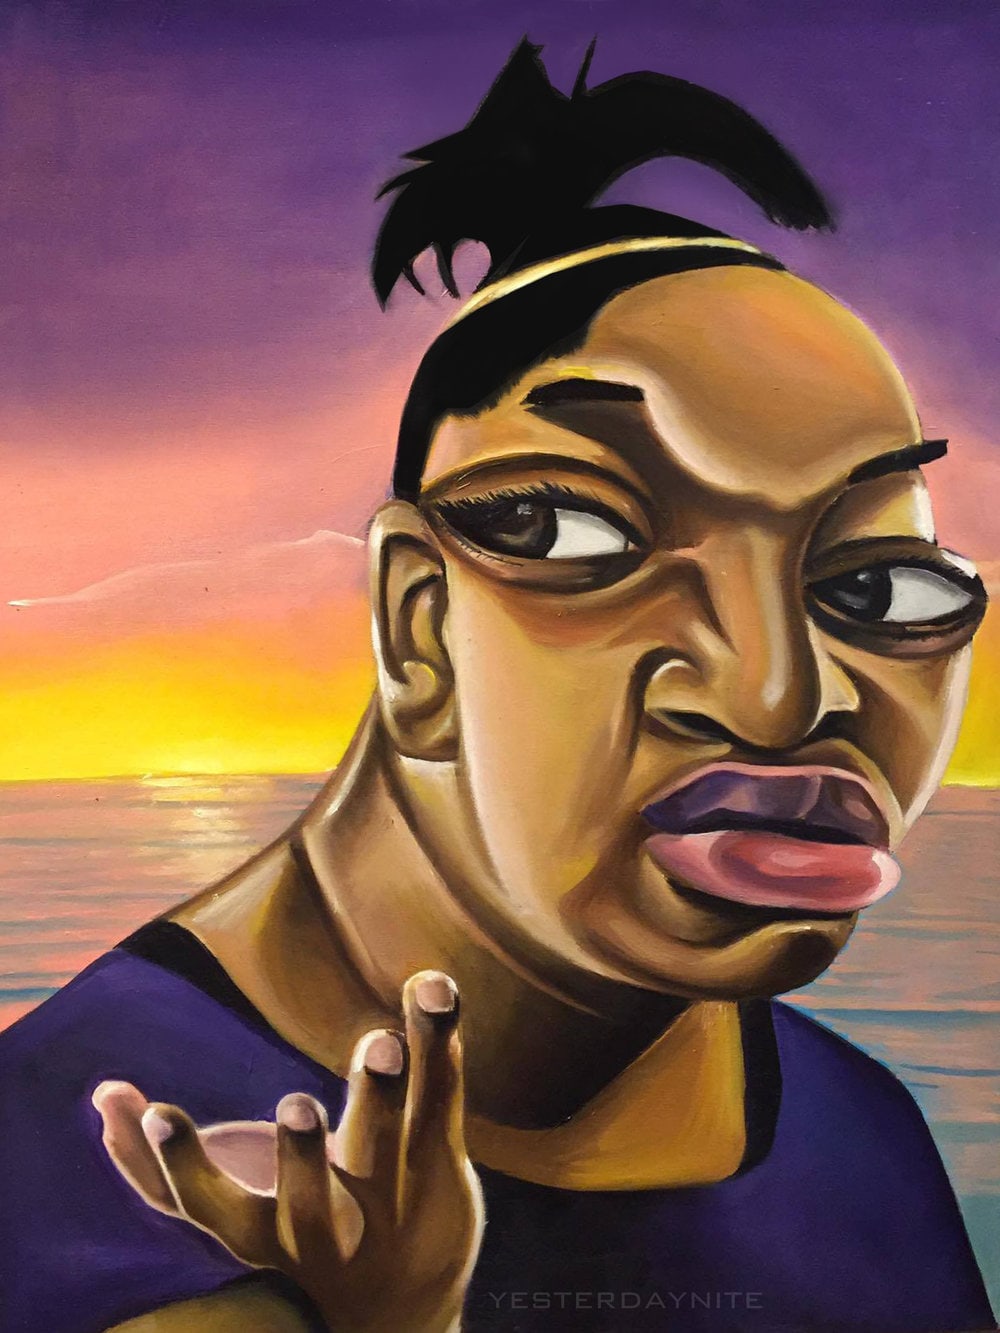 Alim Smith’s Surreal Paintings Pay Homage To Black Icons And Memes